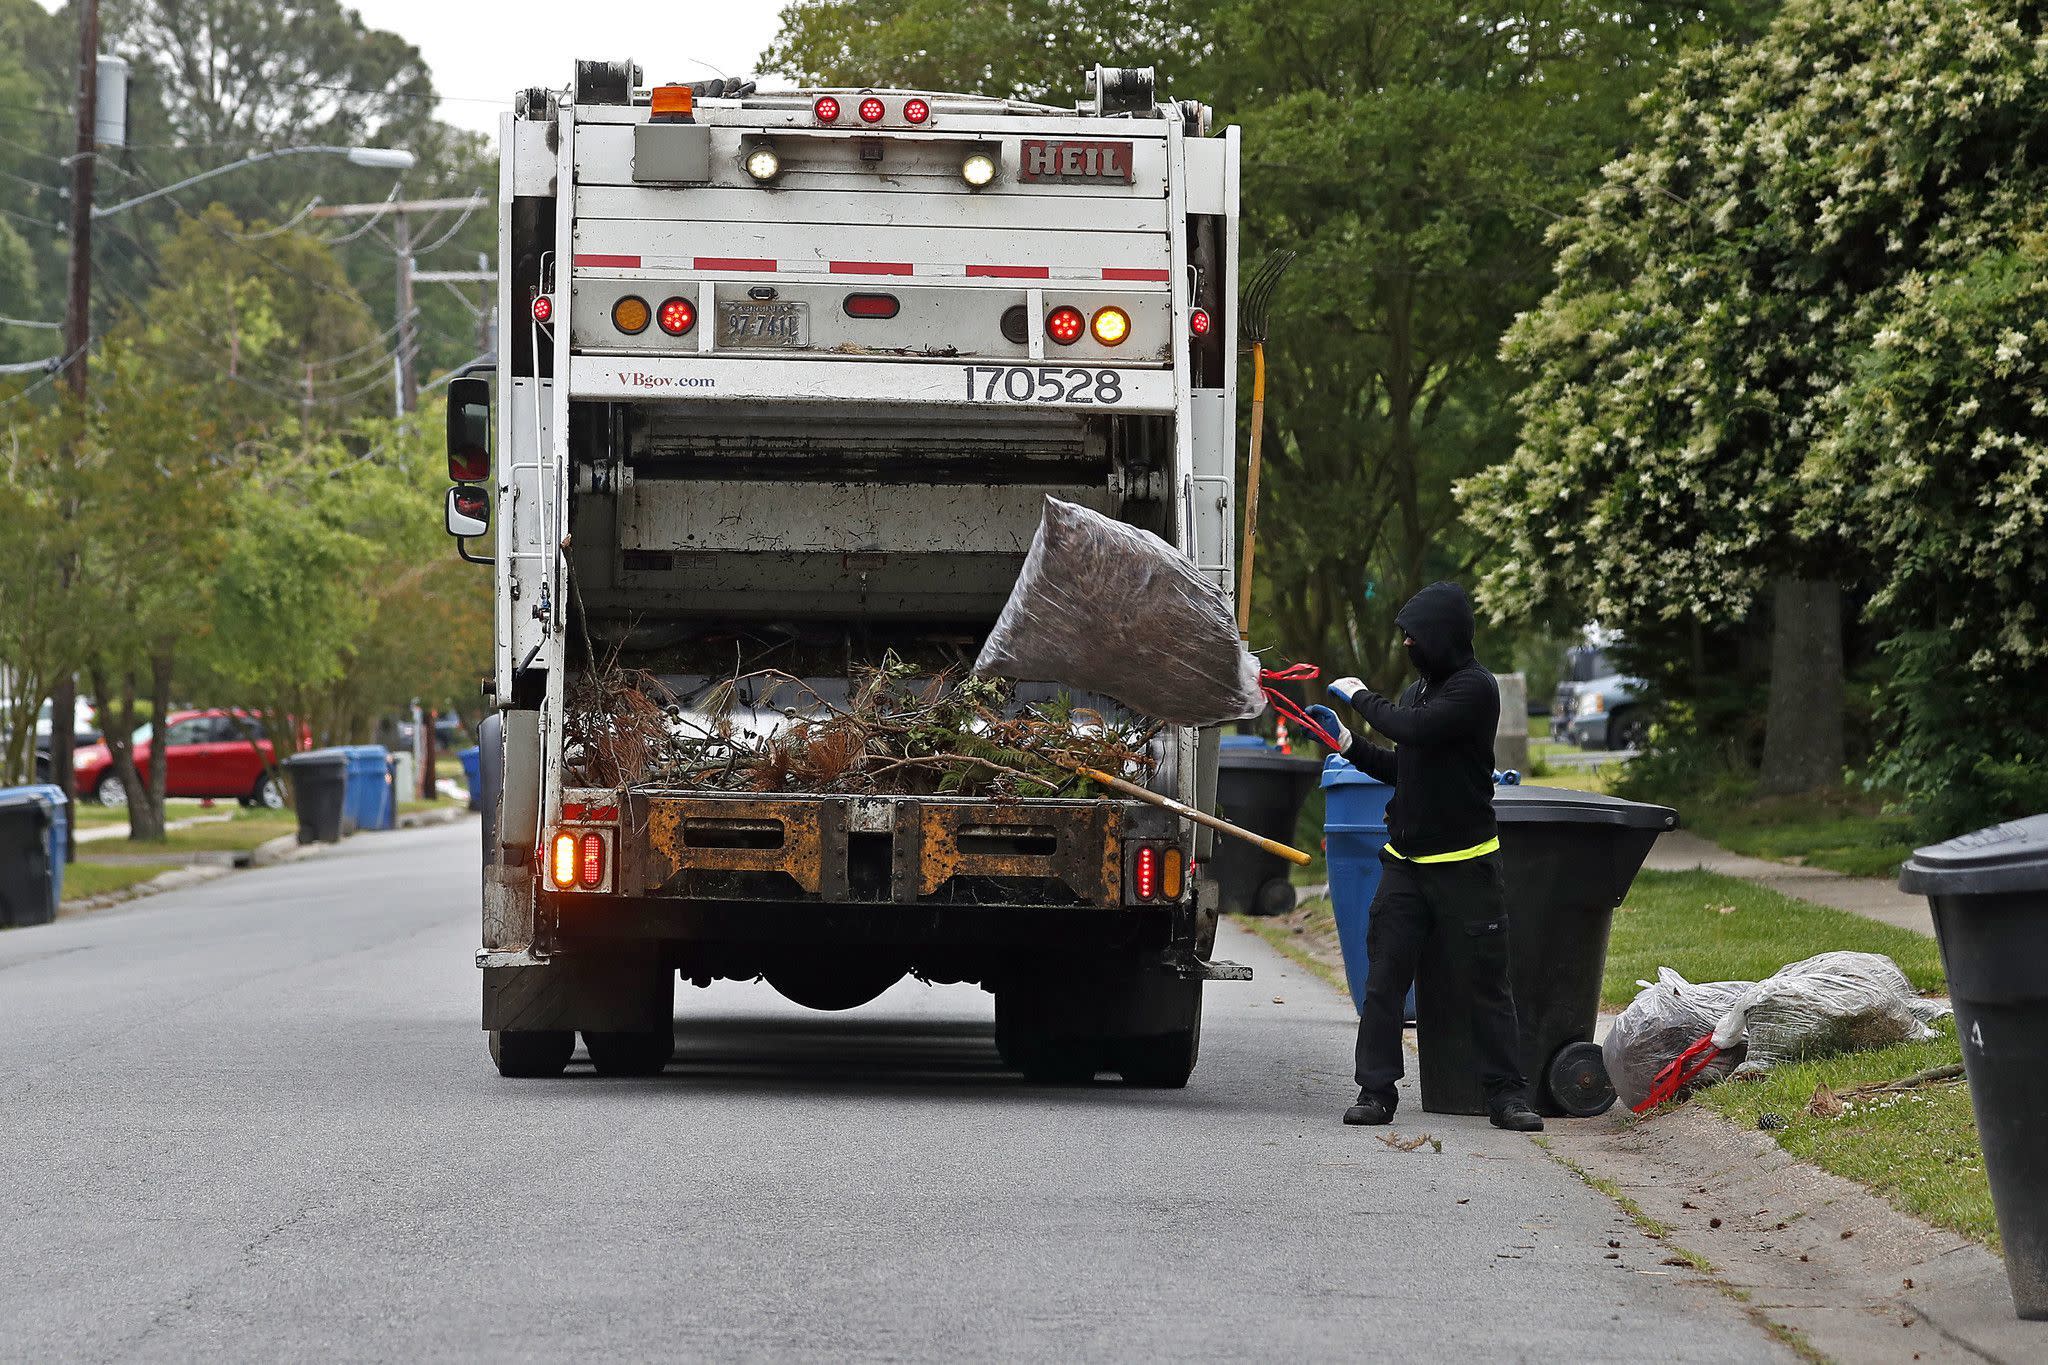 Virginia Beach waste management employees refuse to collect trash on